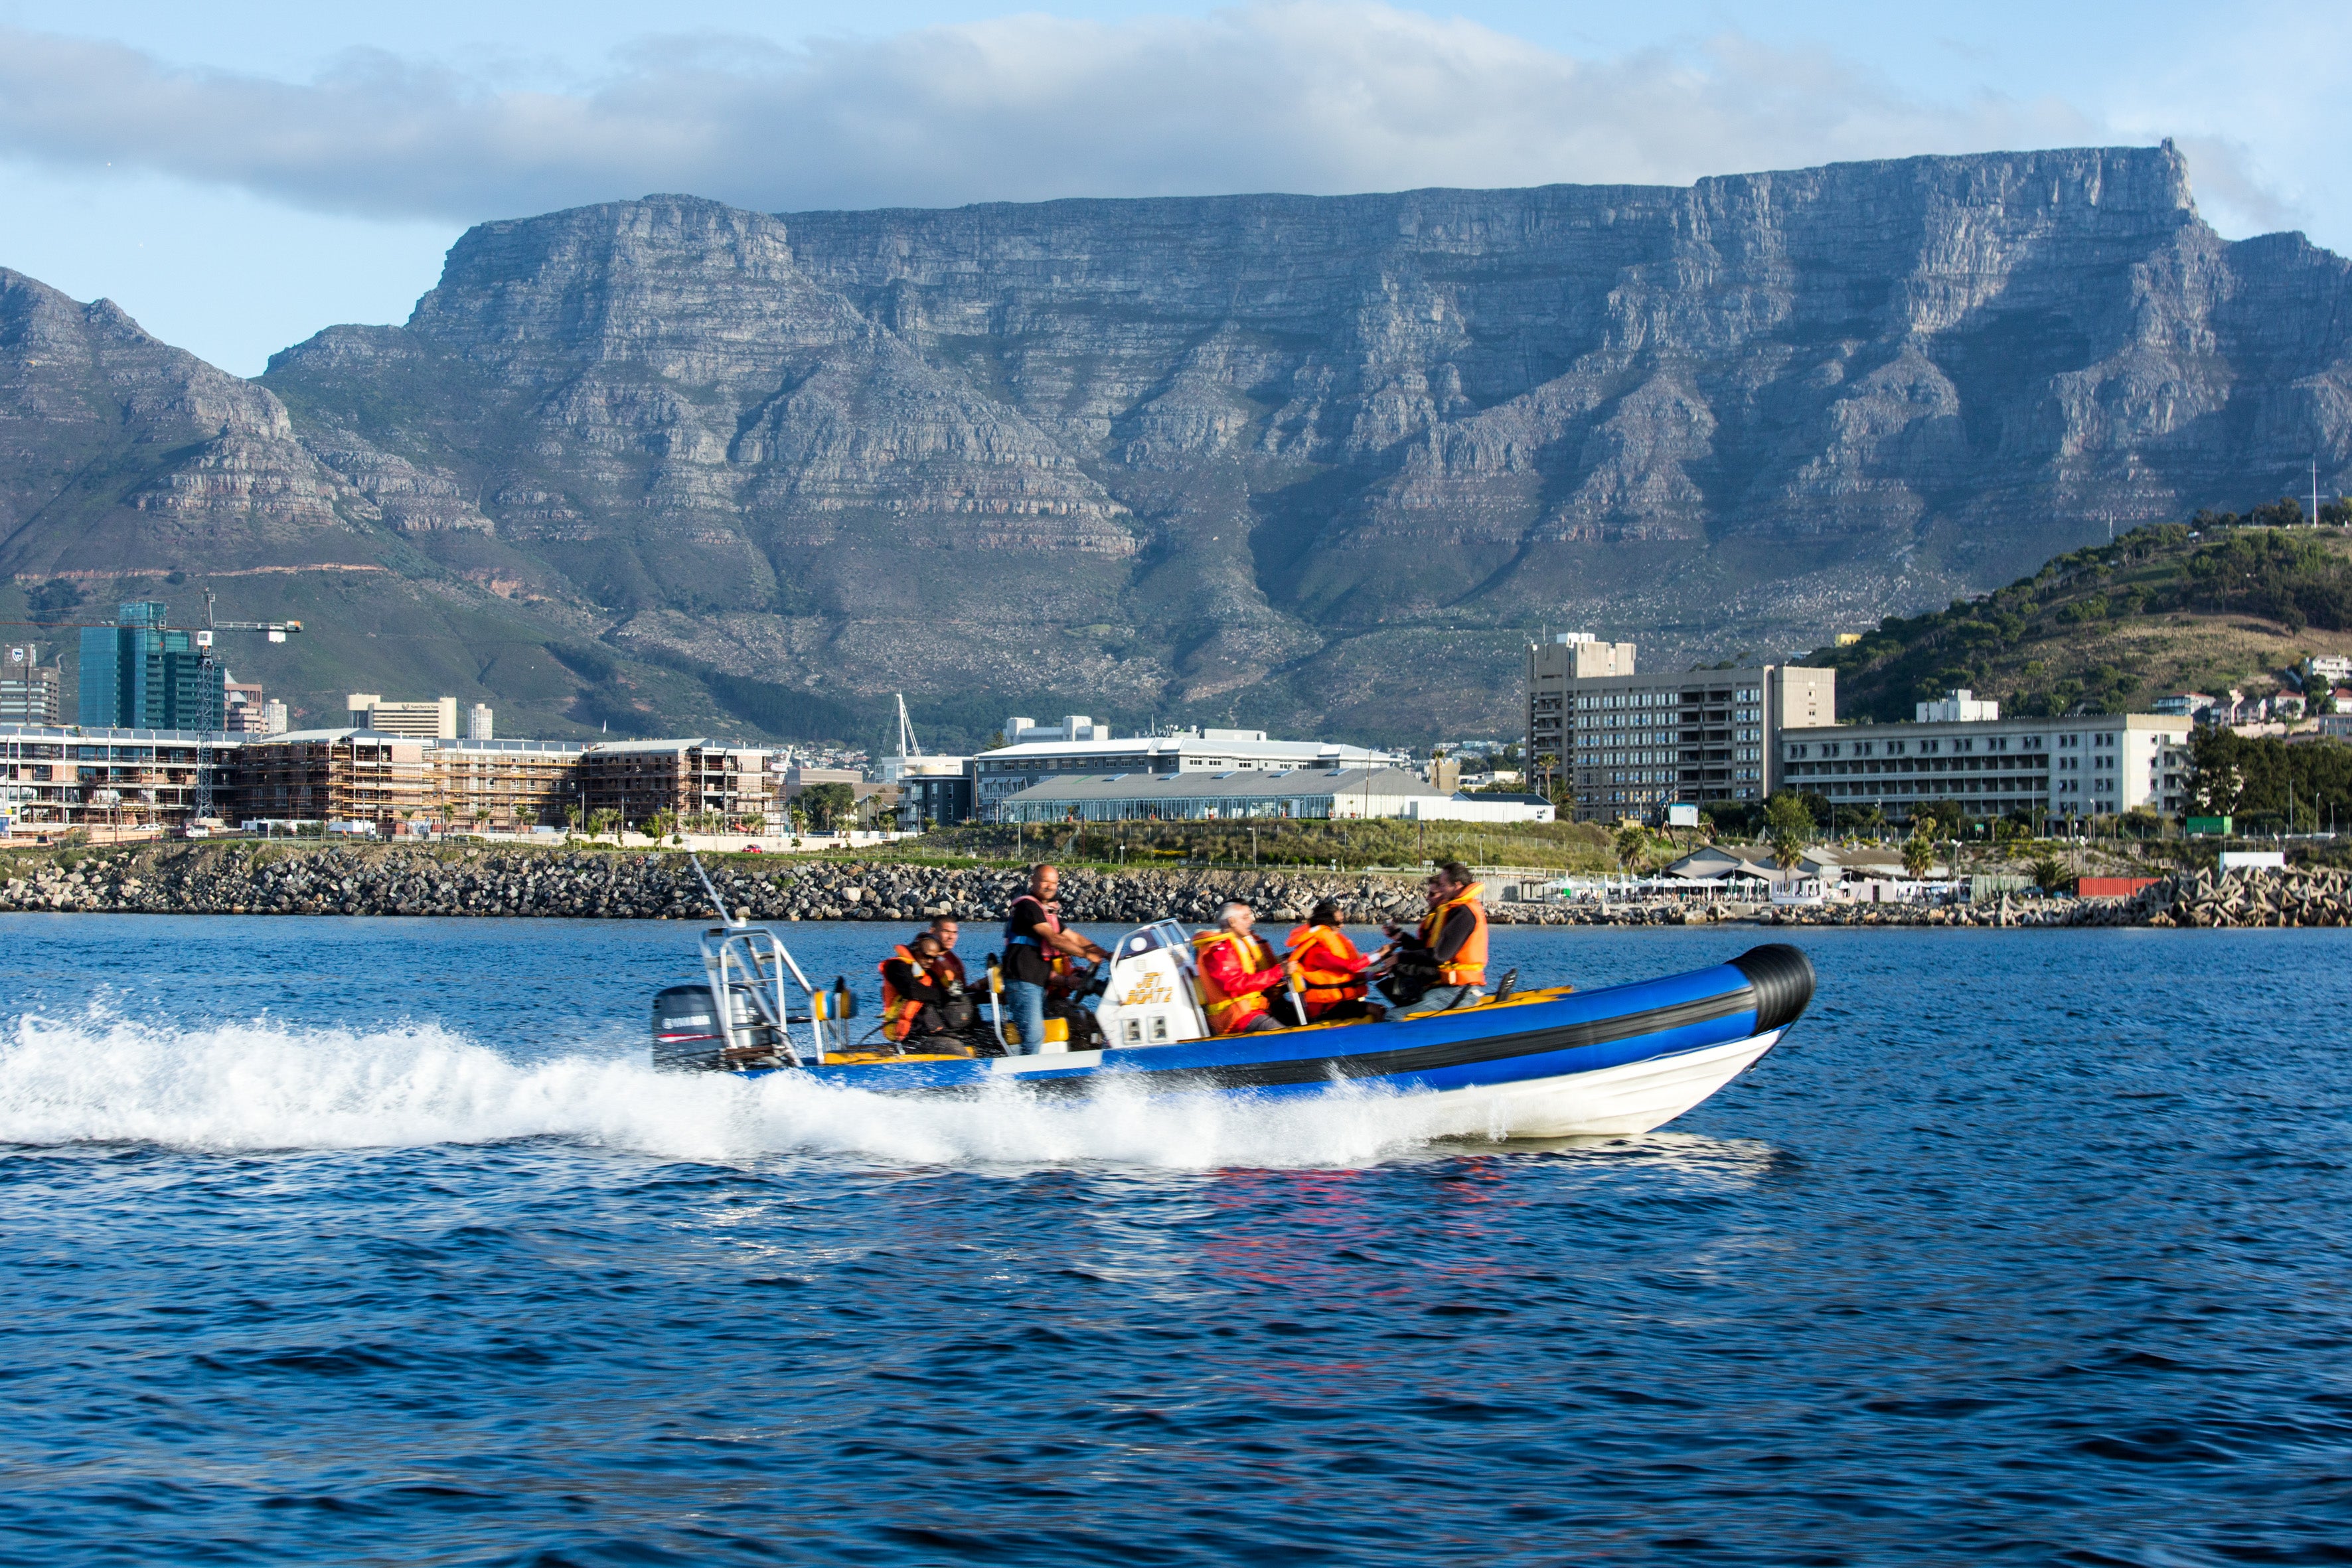 Making waves: tourists motor across the bay in Cape Town